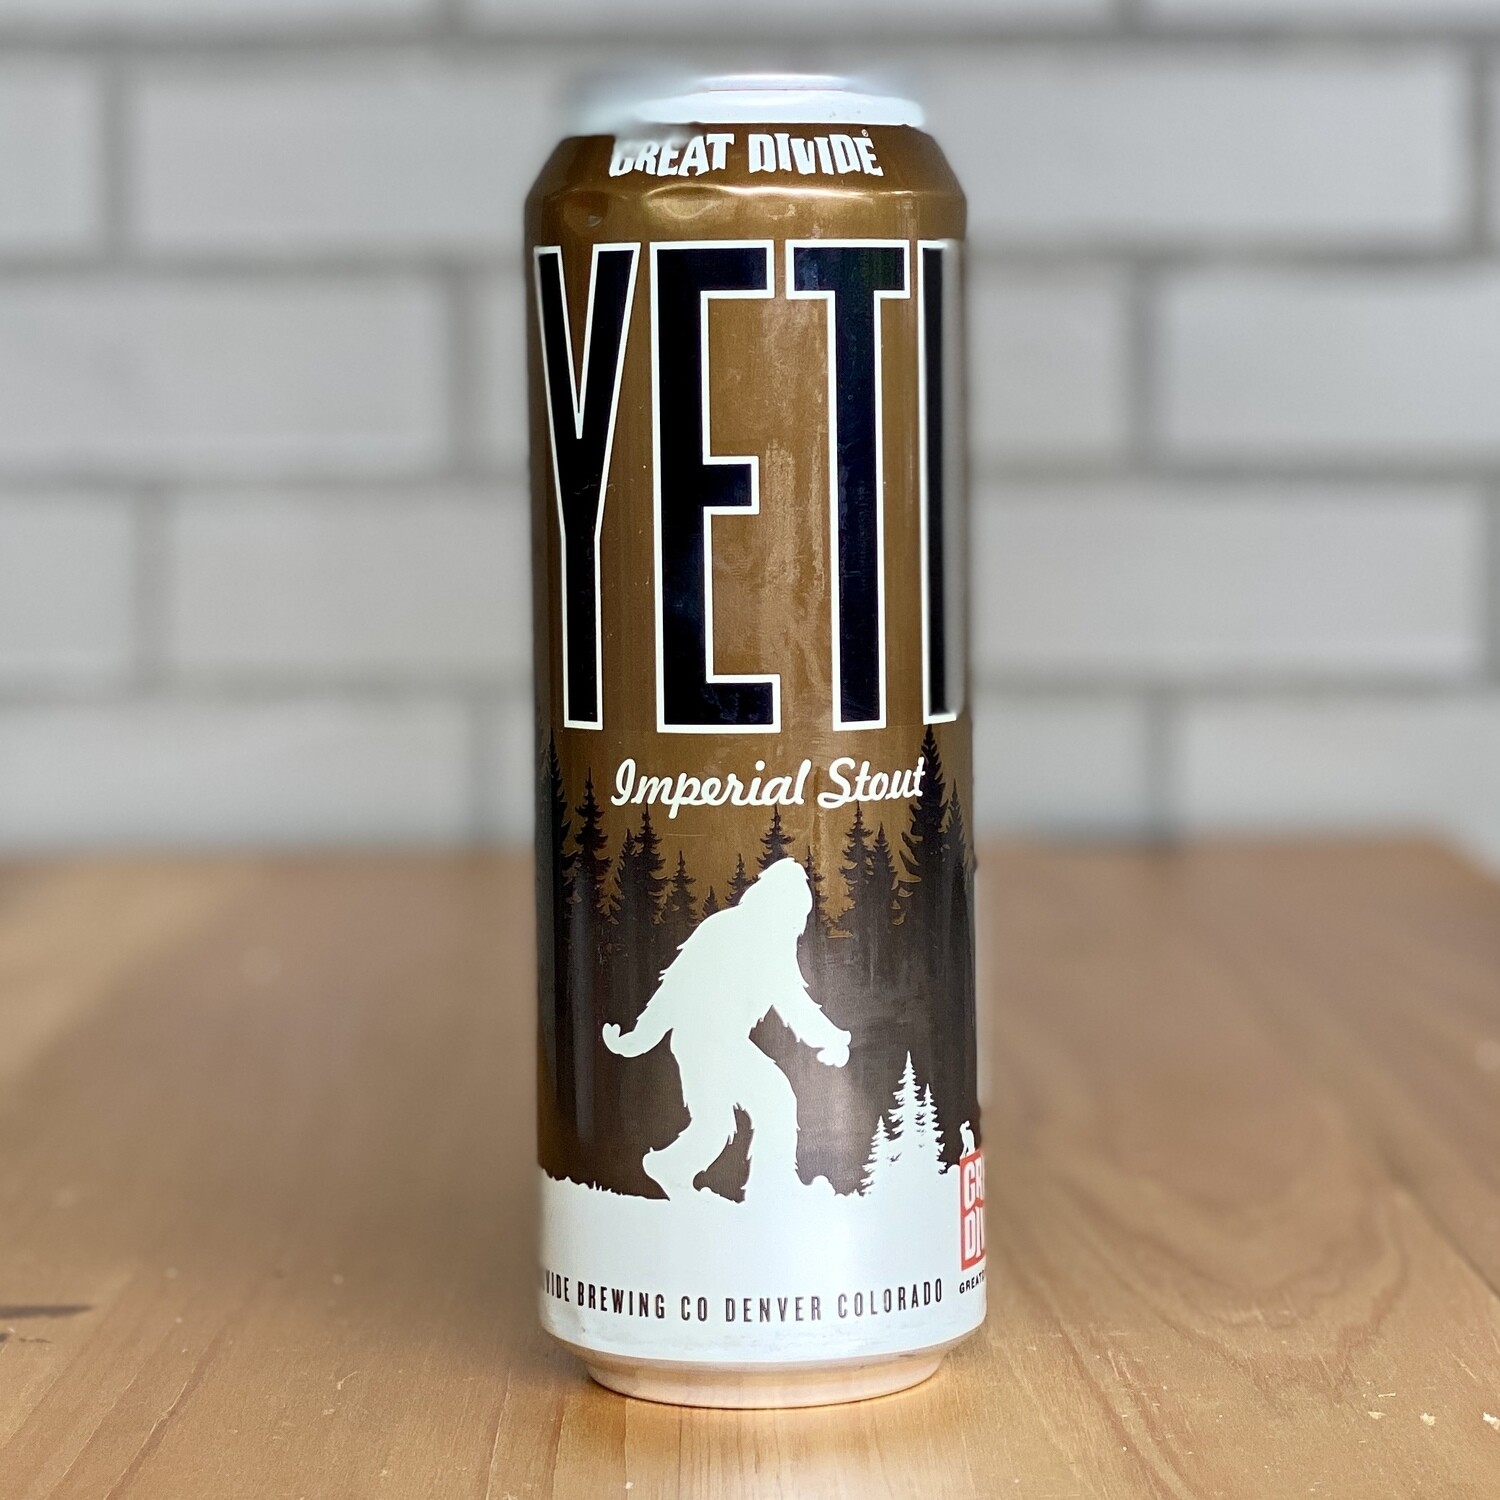 Great Divide Yeti Imperial Stout (19.2oz)